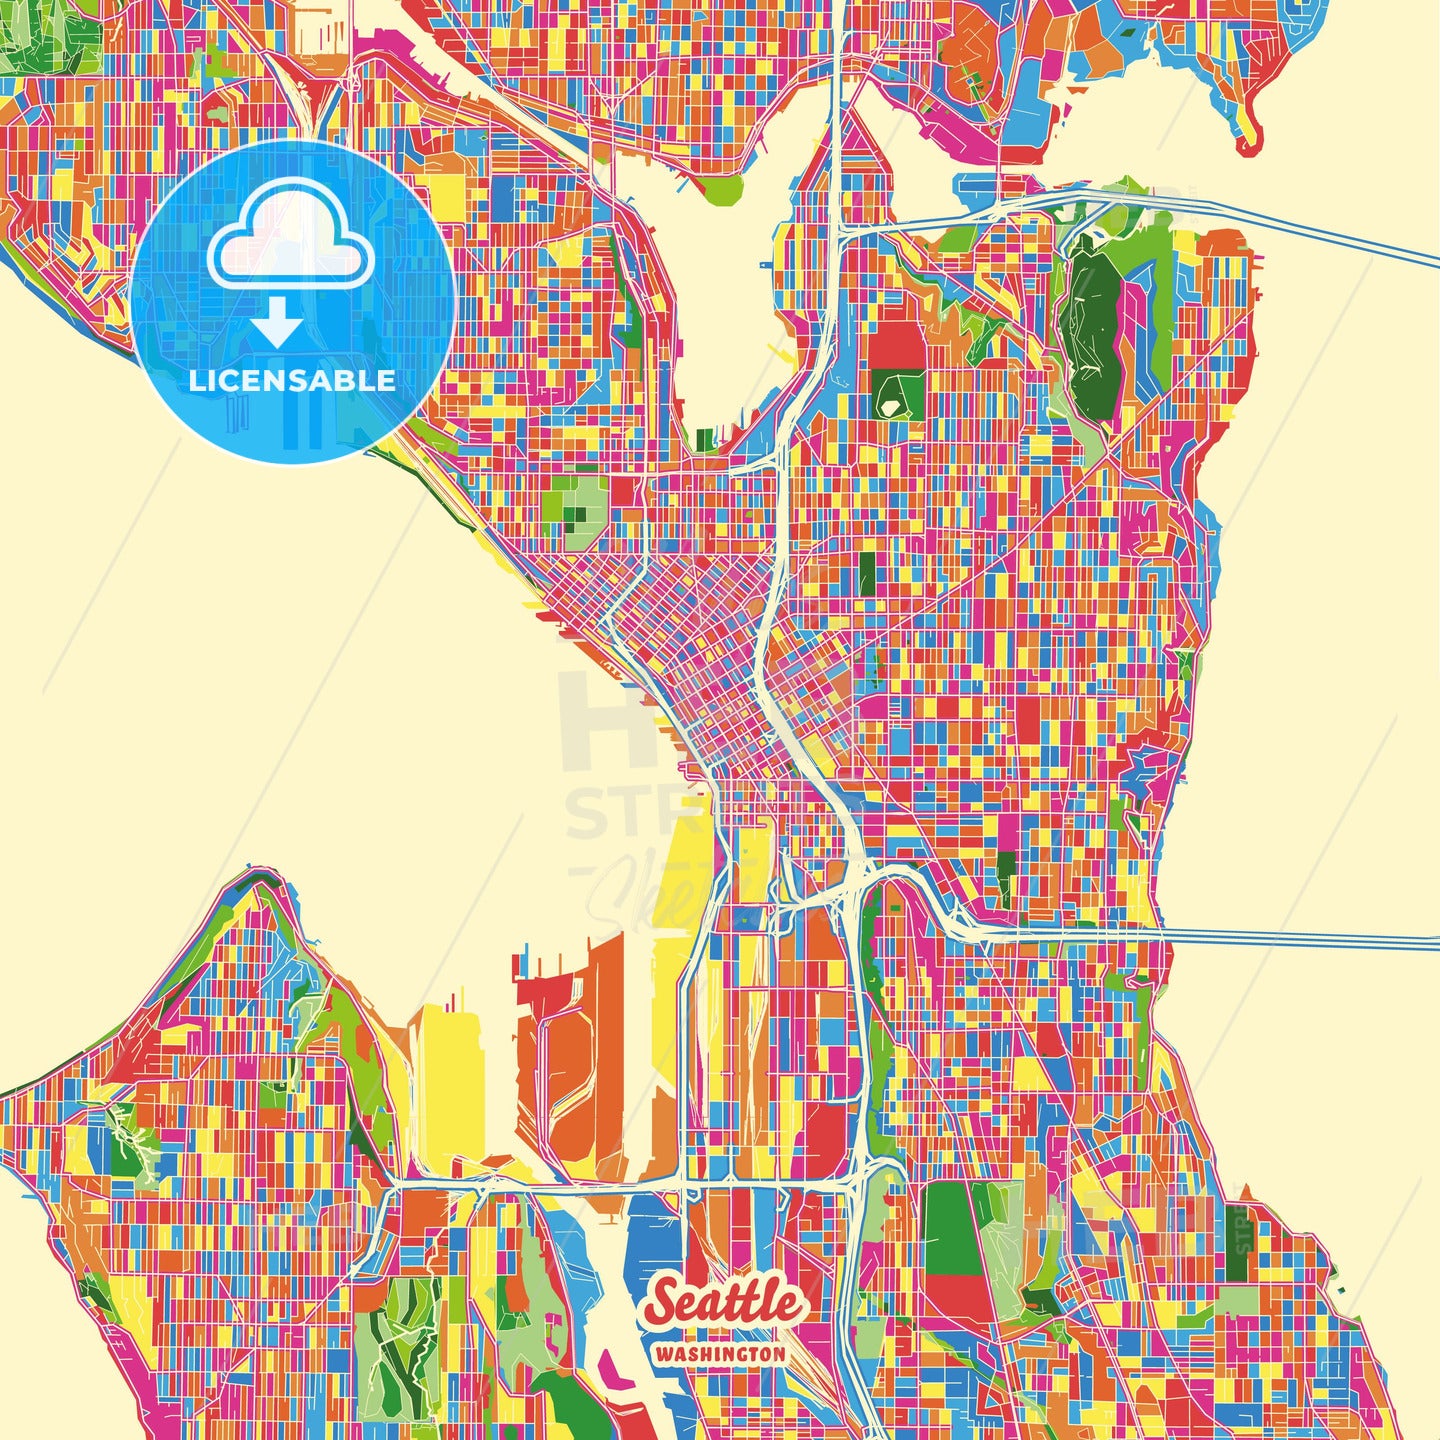 Seattle, United States Crazy Colorful Street Map Poster Template - HEBSTREITS Sketches